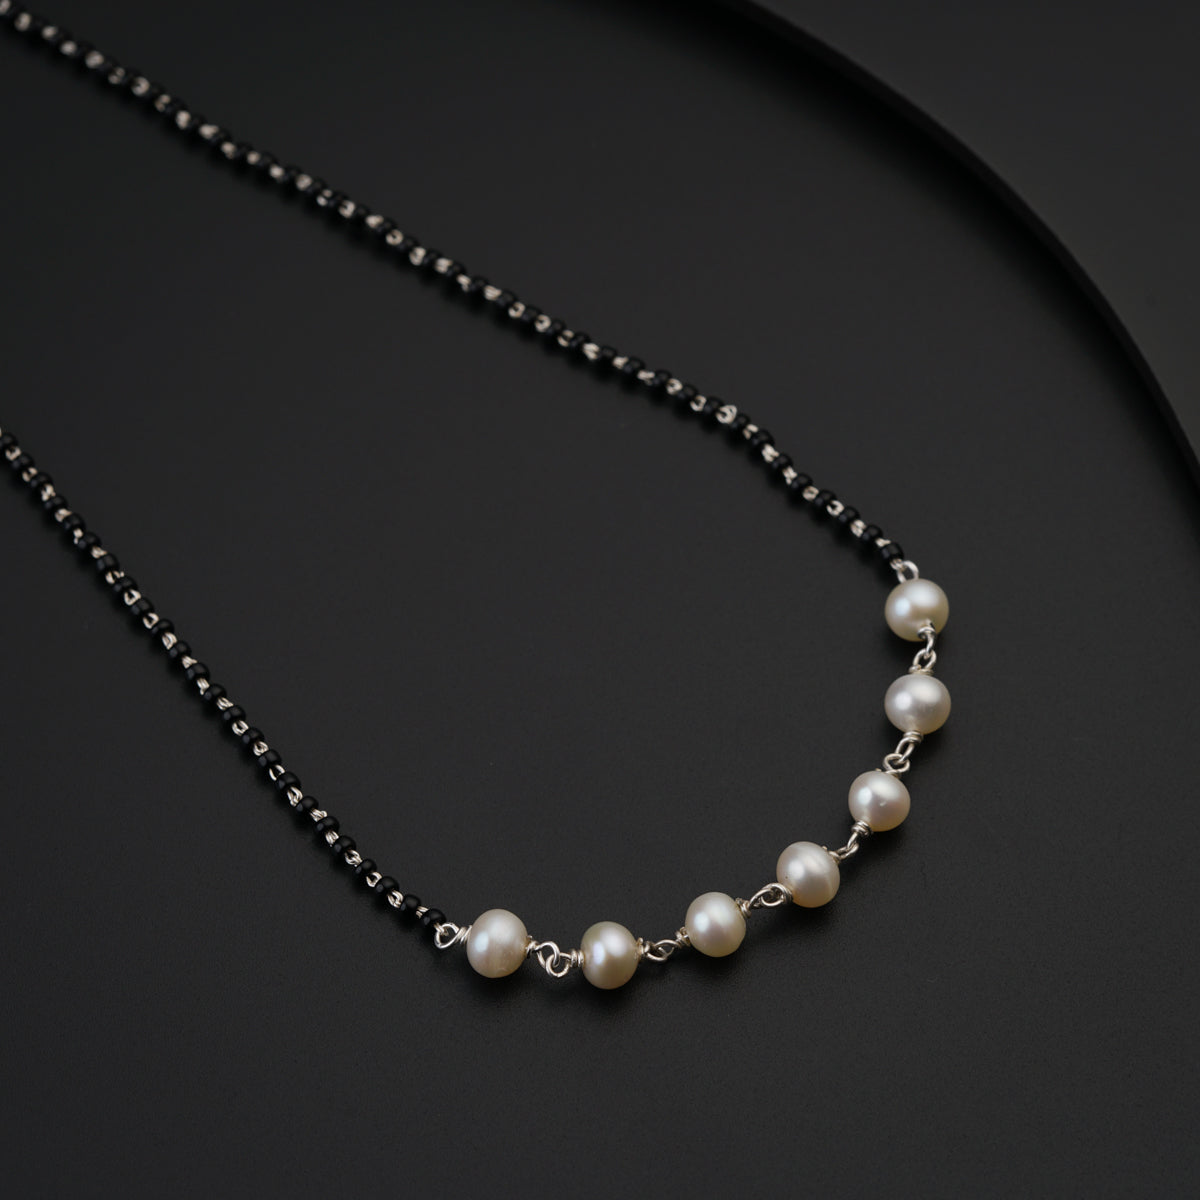 a necklace with pearls on a black surface